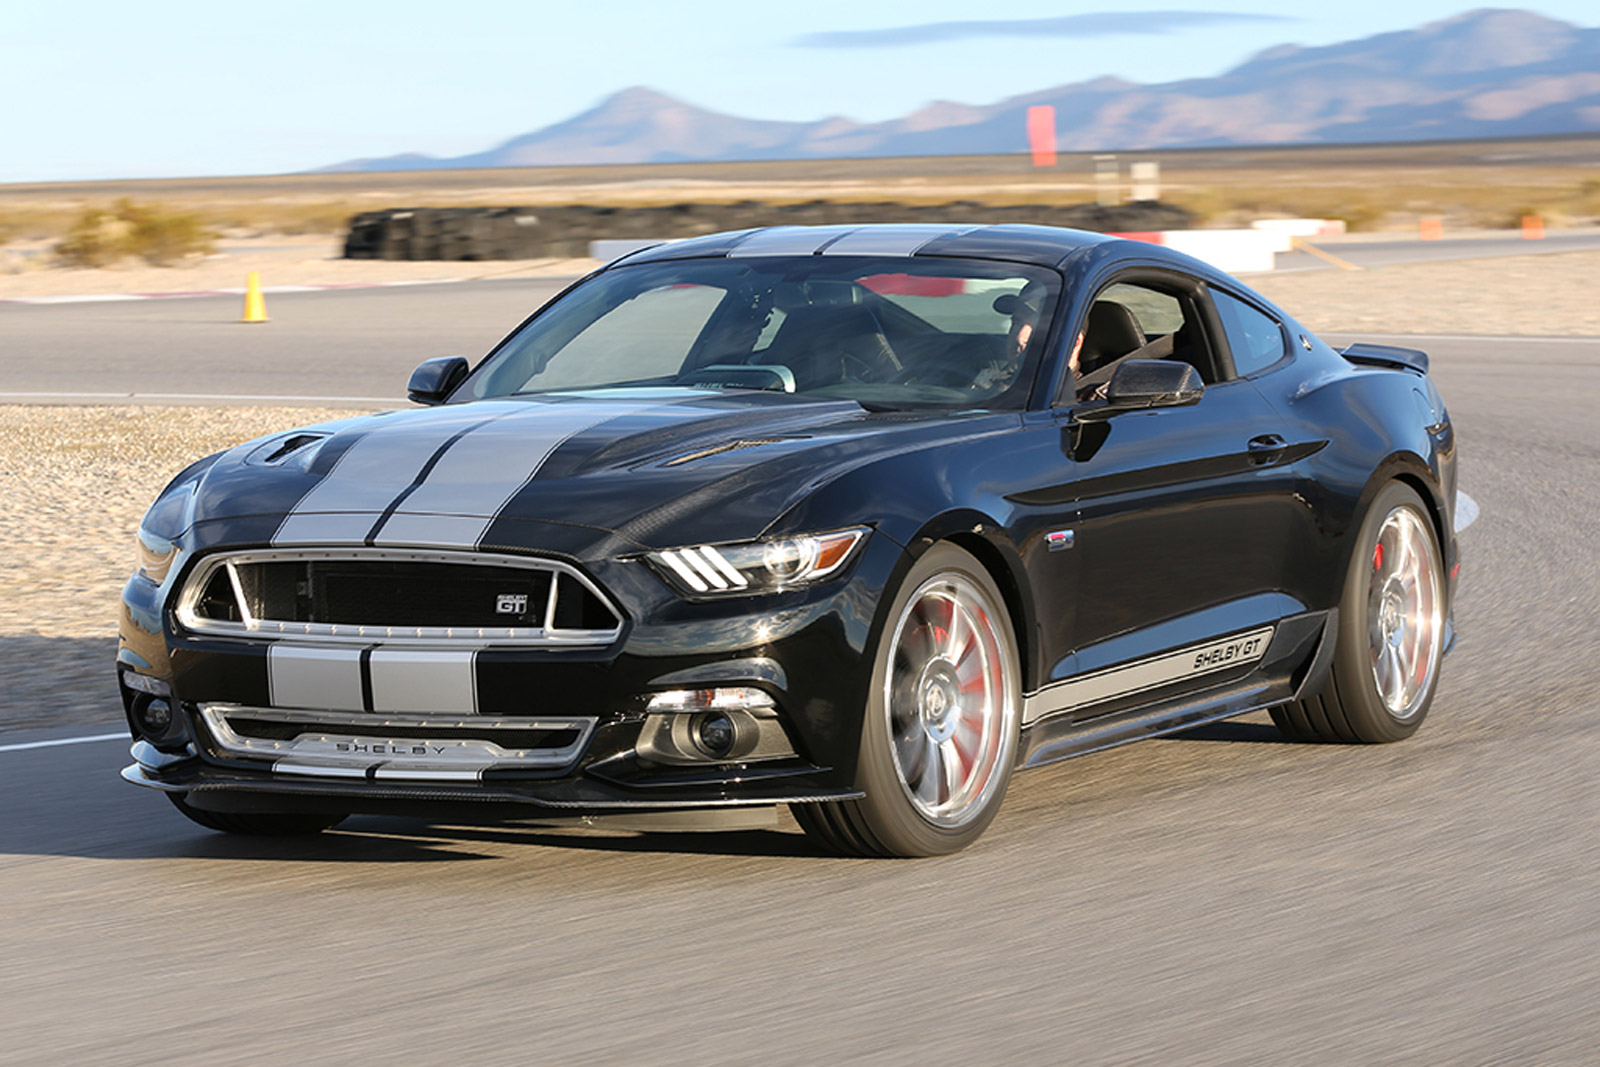 2015 Ford Shelby GT Debuts With 625 Horsepower: Video